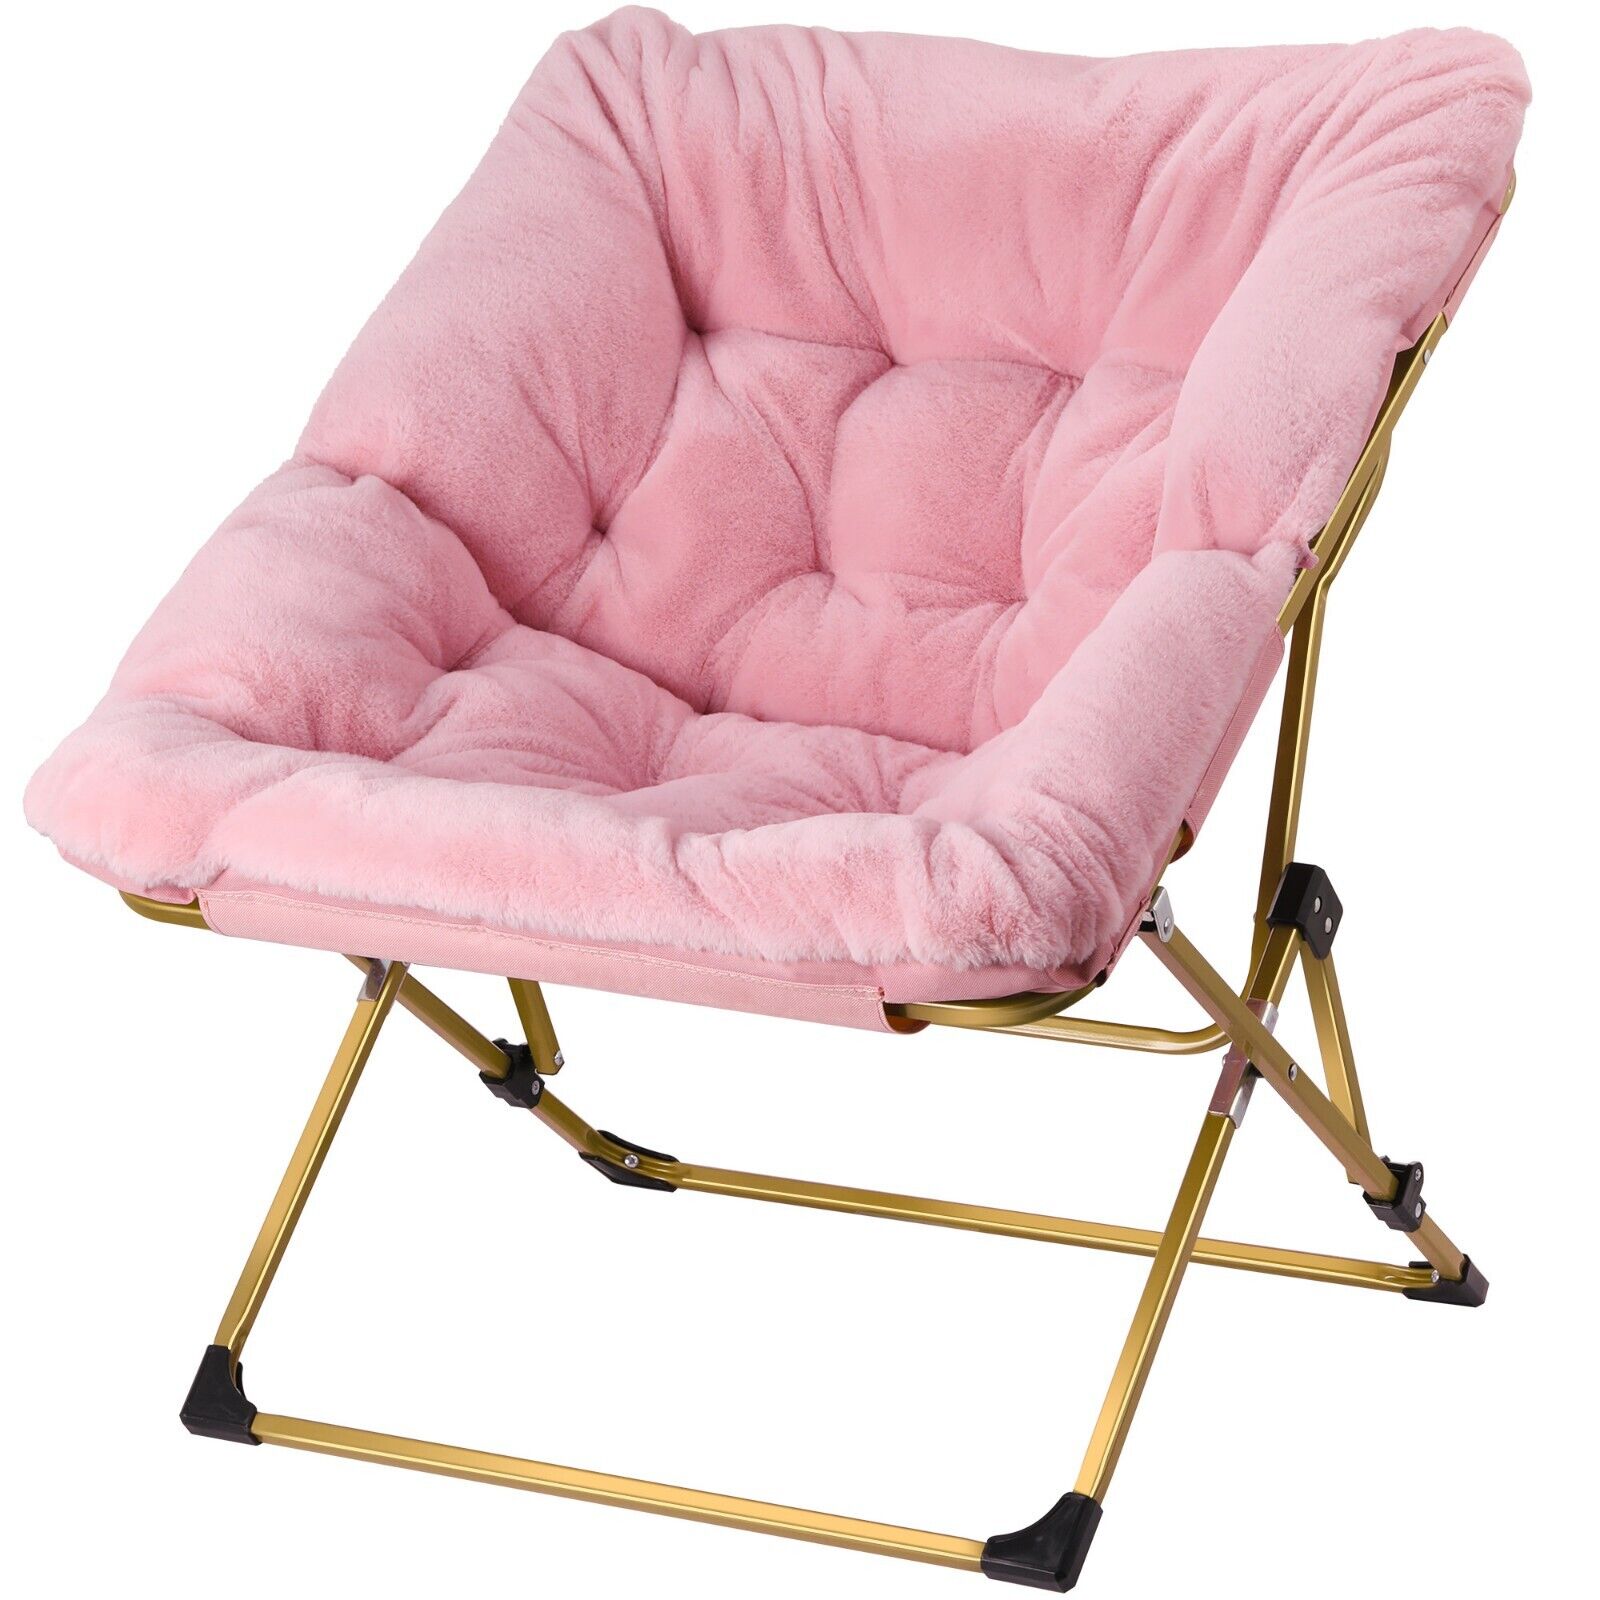 Comfy Saucer Chair Soft Folding Faux Fur Lounge Lazy Chair Flexible Seat Pink